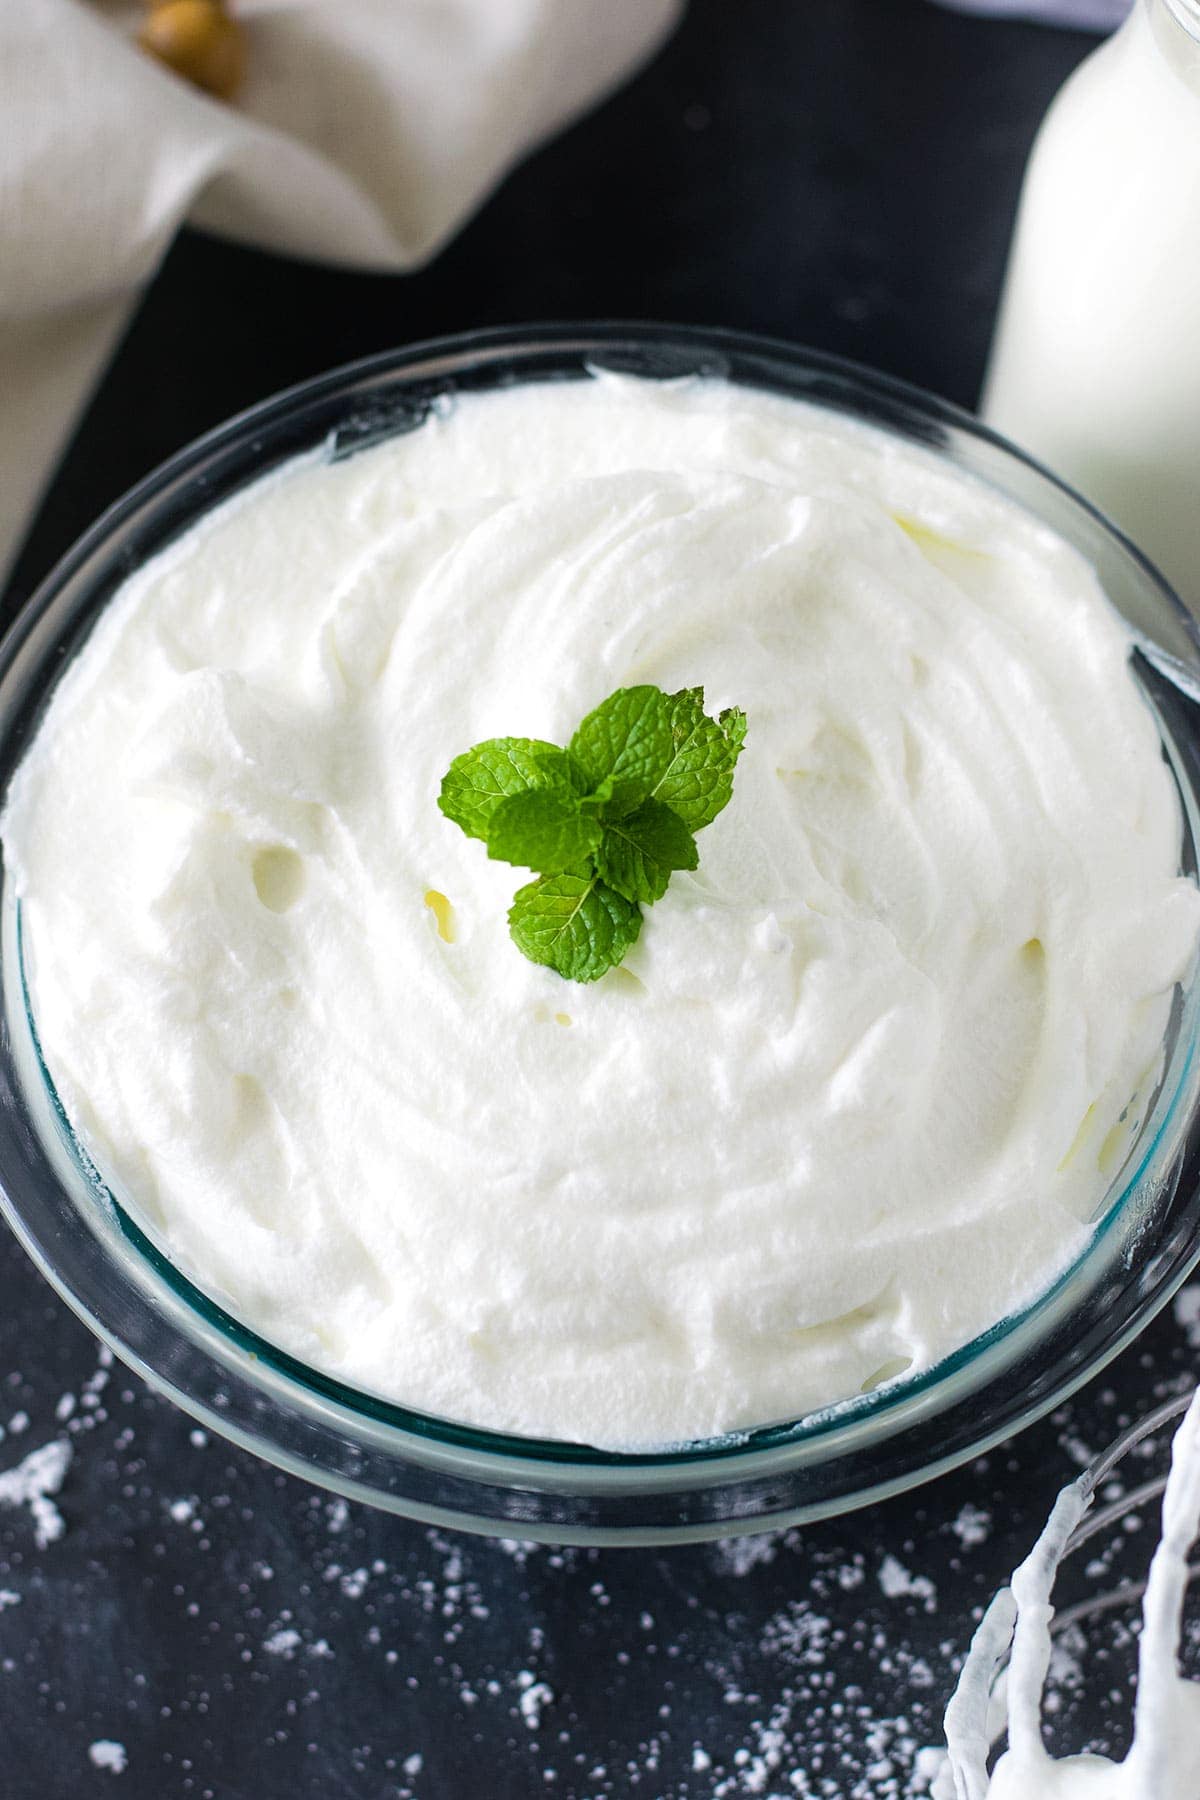 Glass bowl filled with homemade whipped cream garnished with mint leaves.